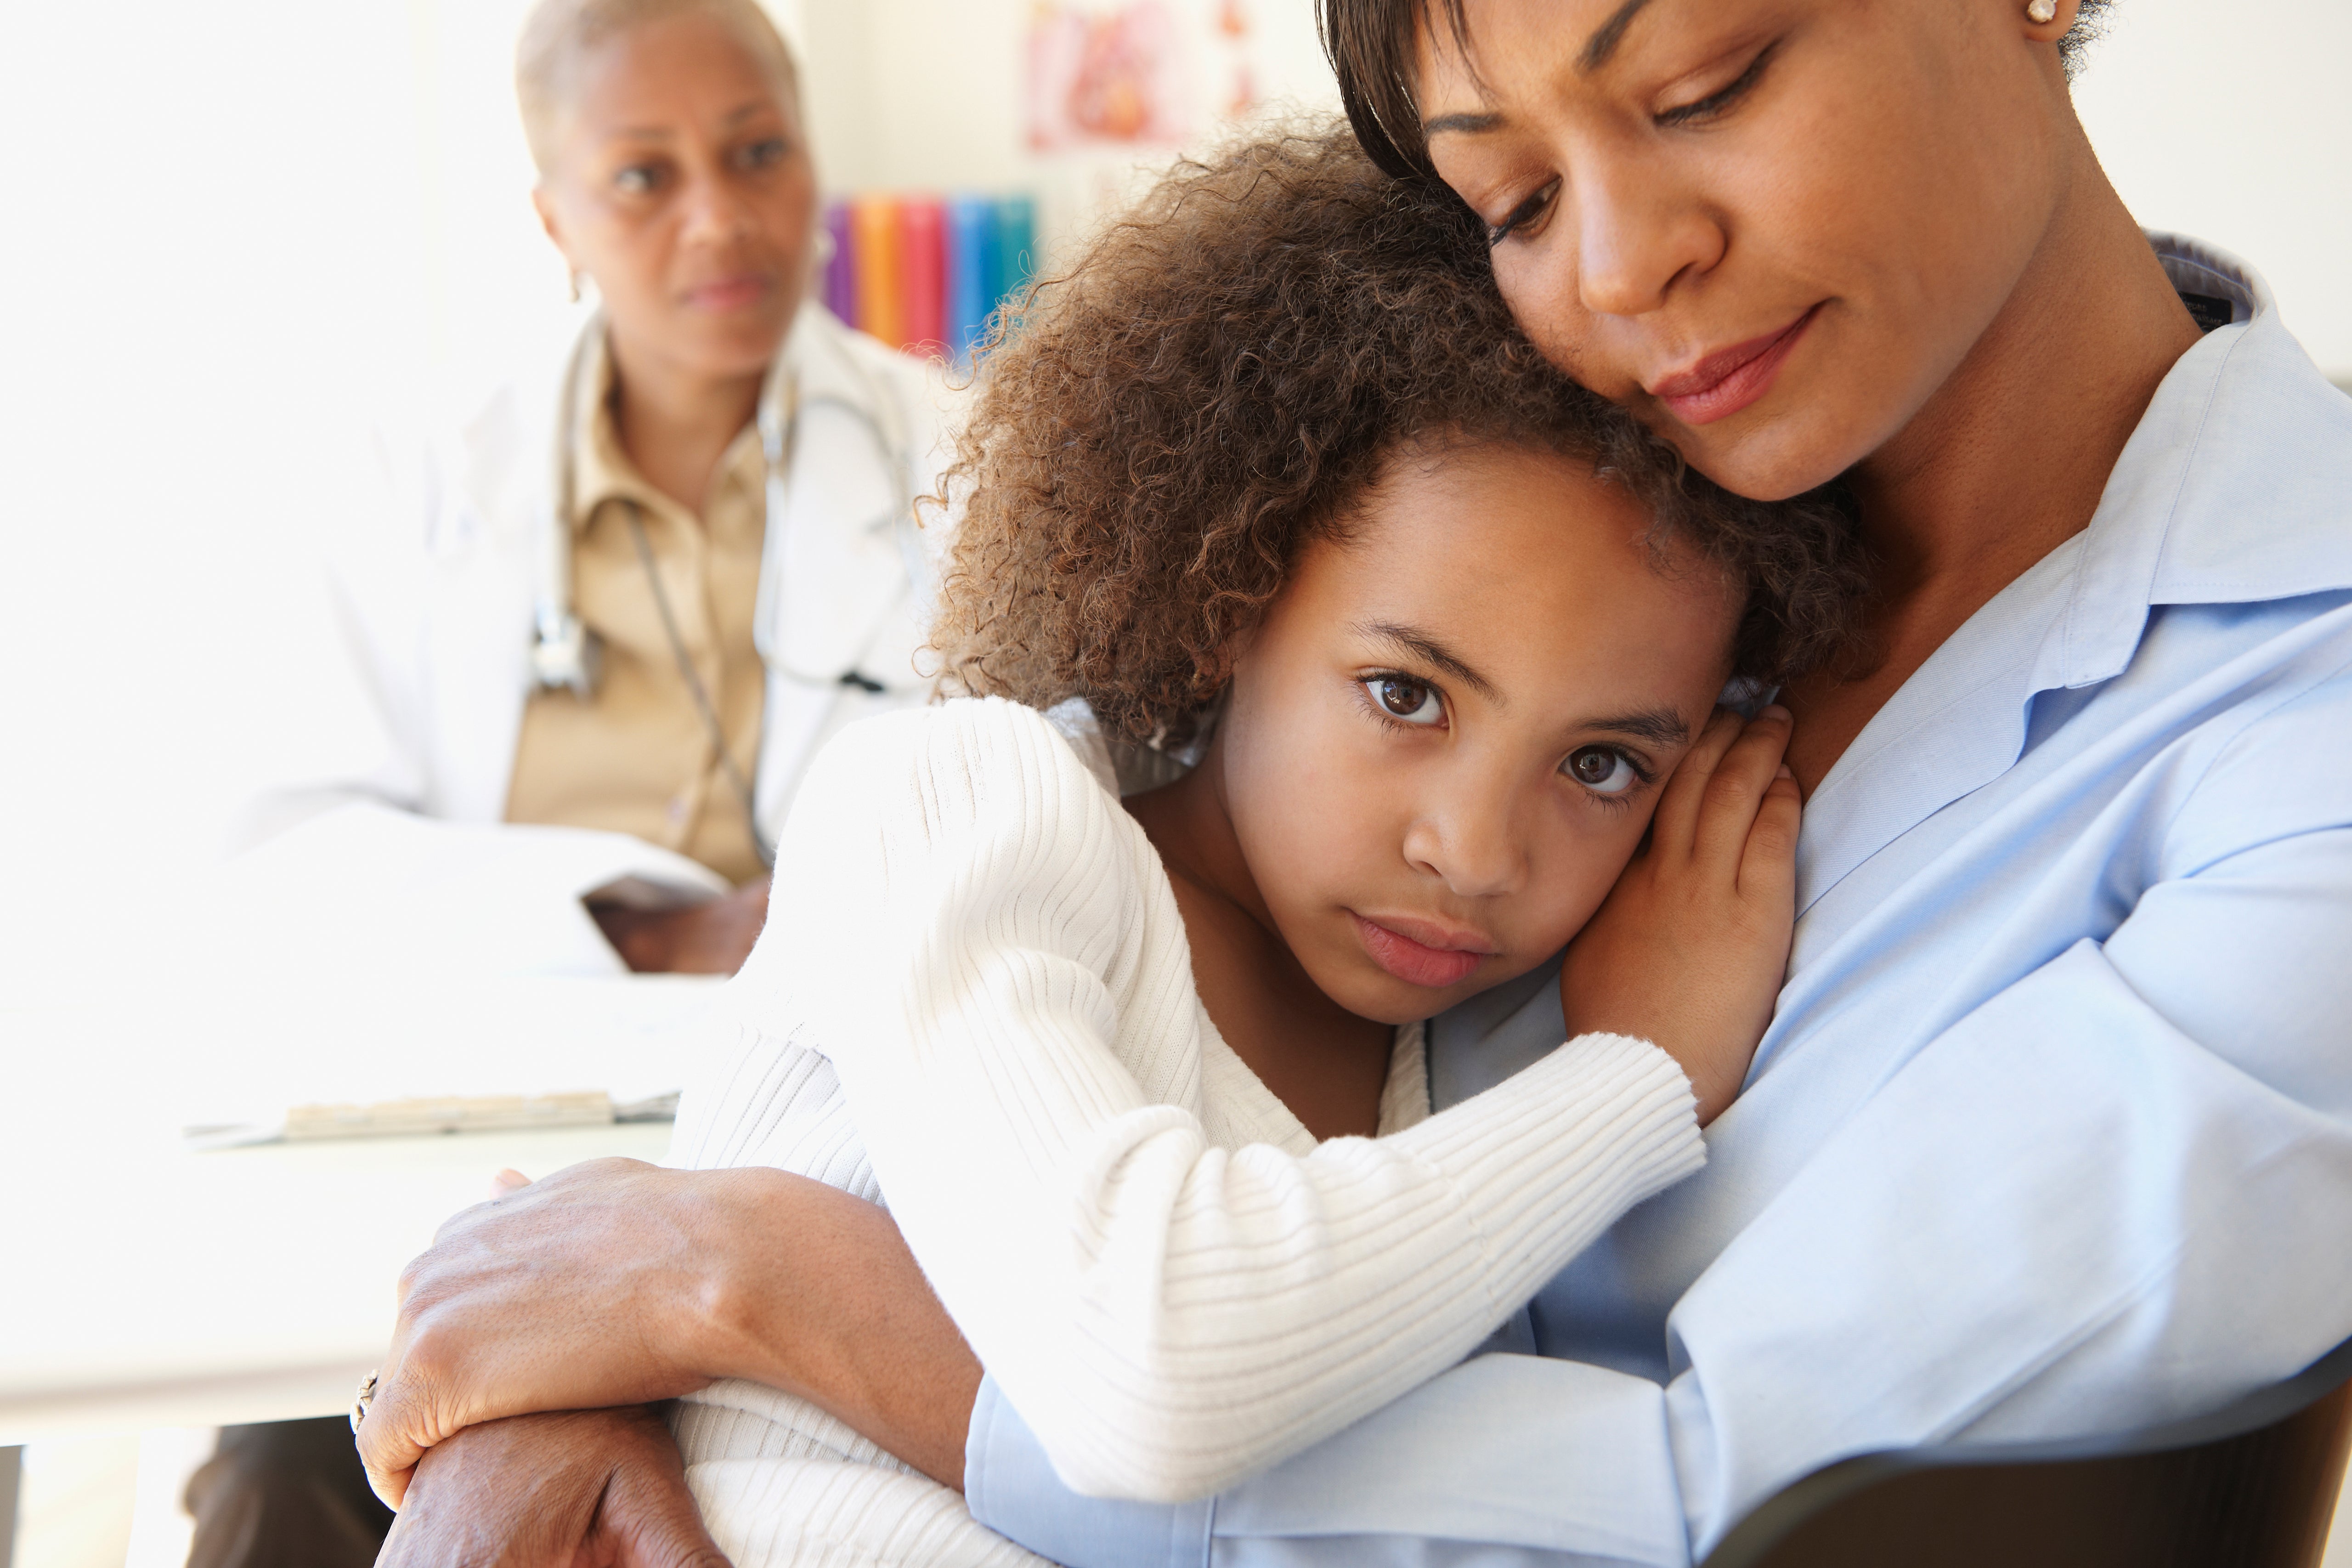 We Need To Rethink What We Tell Black Mothers About Coping With Stress
